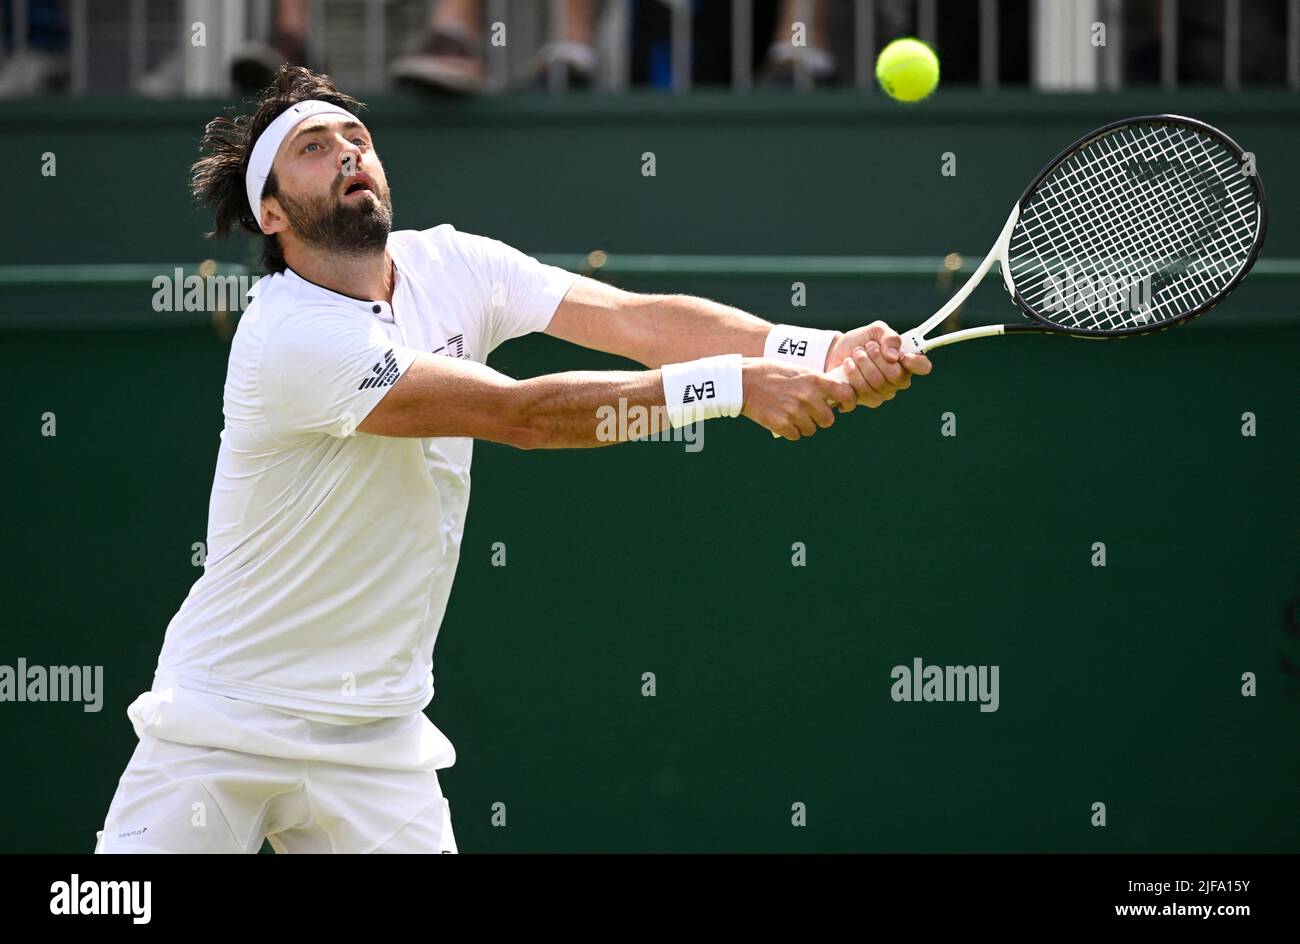 Tennis - Wimbledon - All England Lawn Tennis and Croquet Club, London, Britain - July 1, 2022  Georgia's Nikoloz Basilashvili in action during his third round match against Netherlands' Tim van Rijthoven REUTERS/Toby Melville Stock Photo